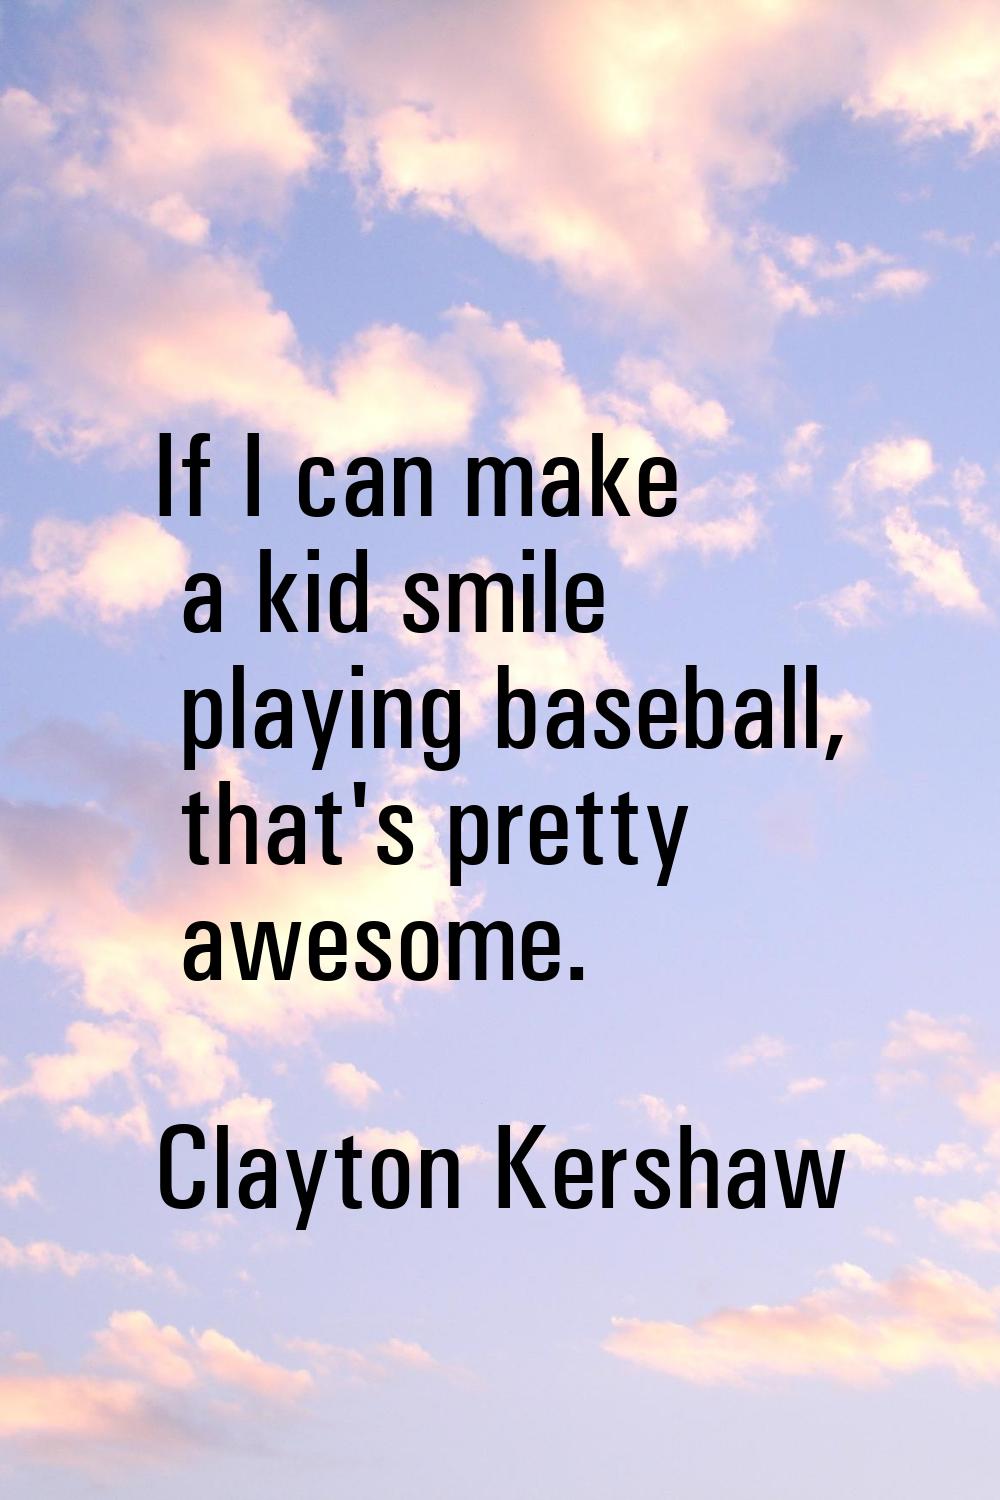 If I can make a kid smile playing baseball, that's pretty awesome.